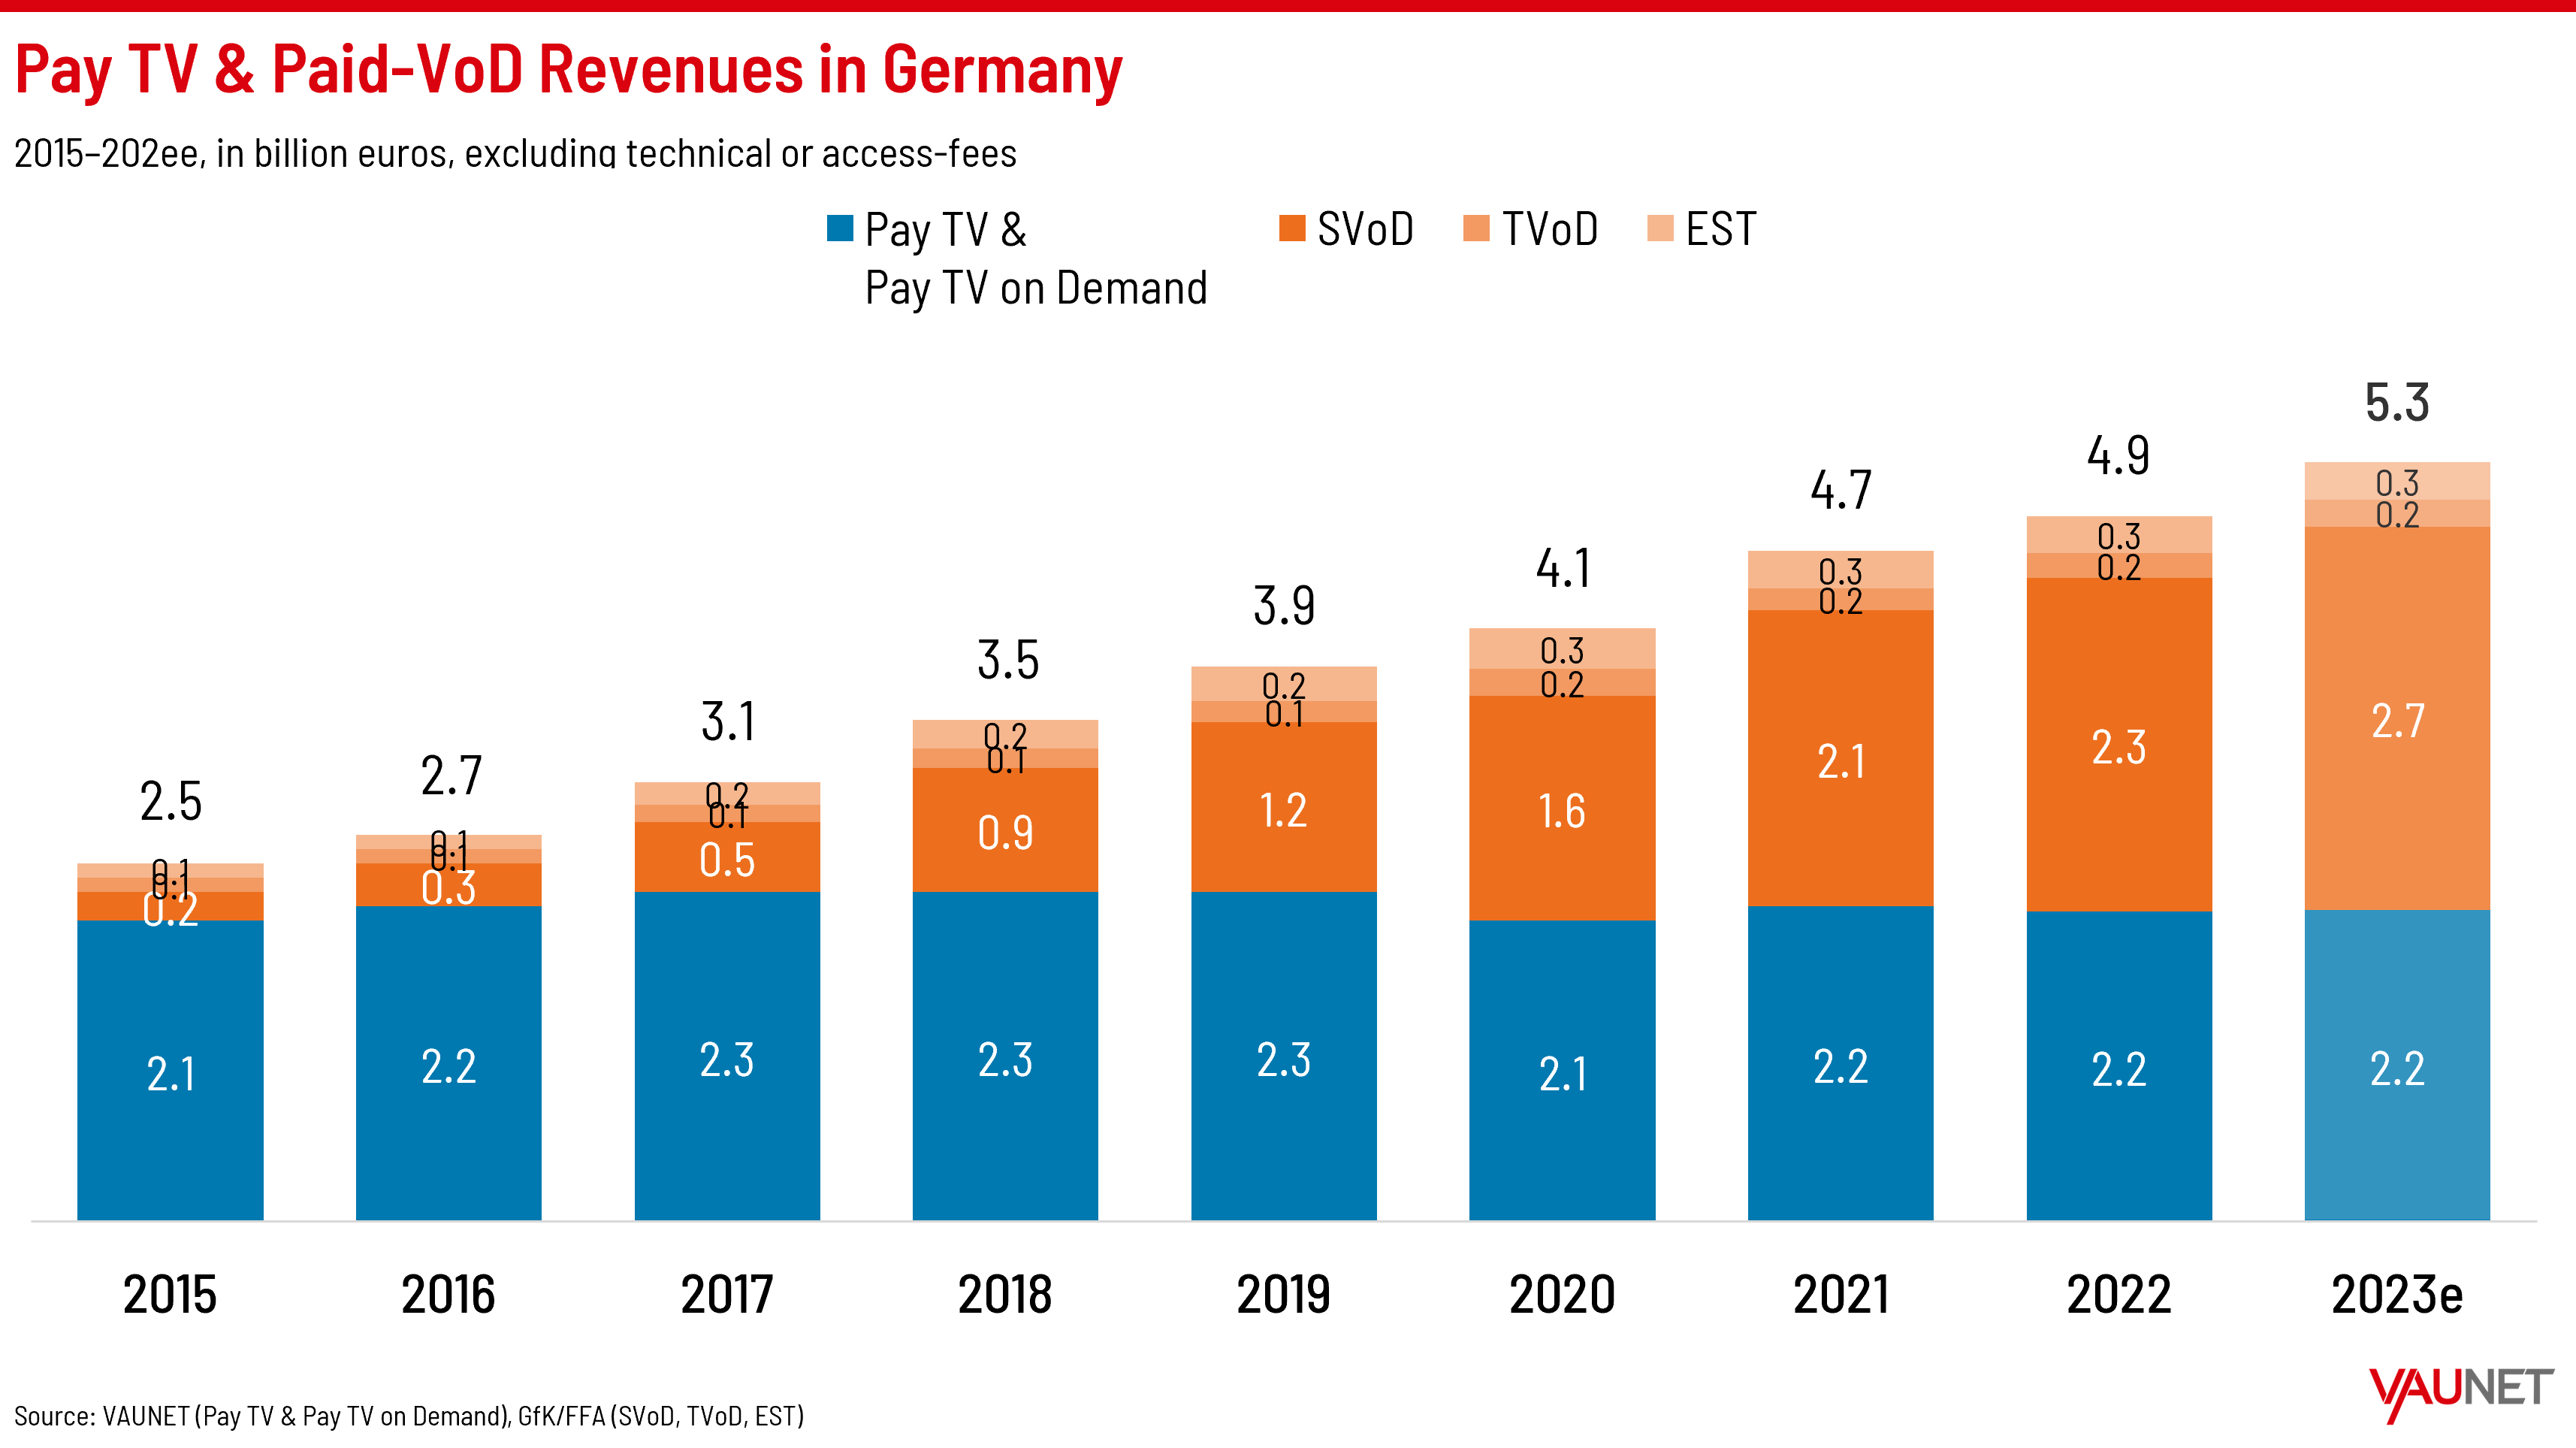 Pay TV and paid video content revenues in Germany rose again in 2022